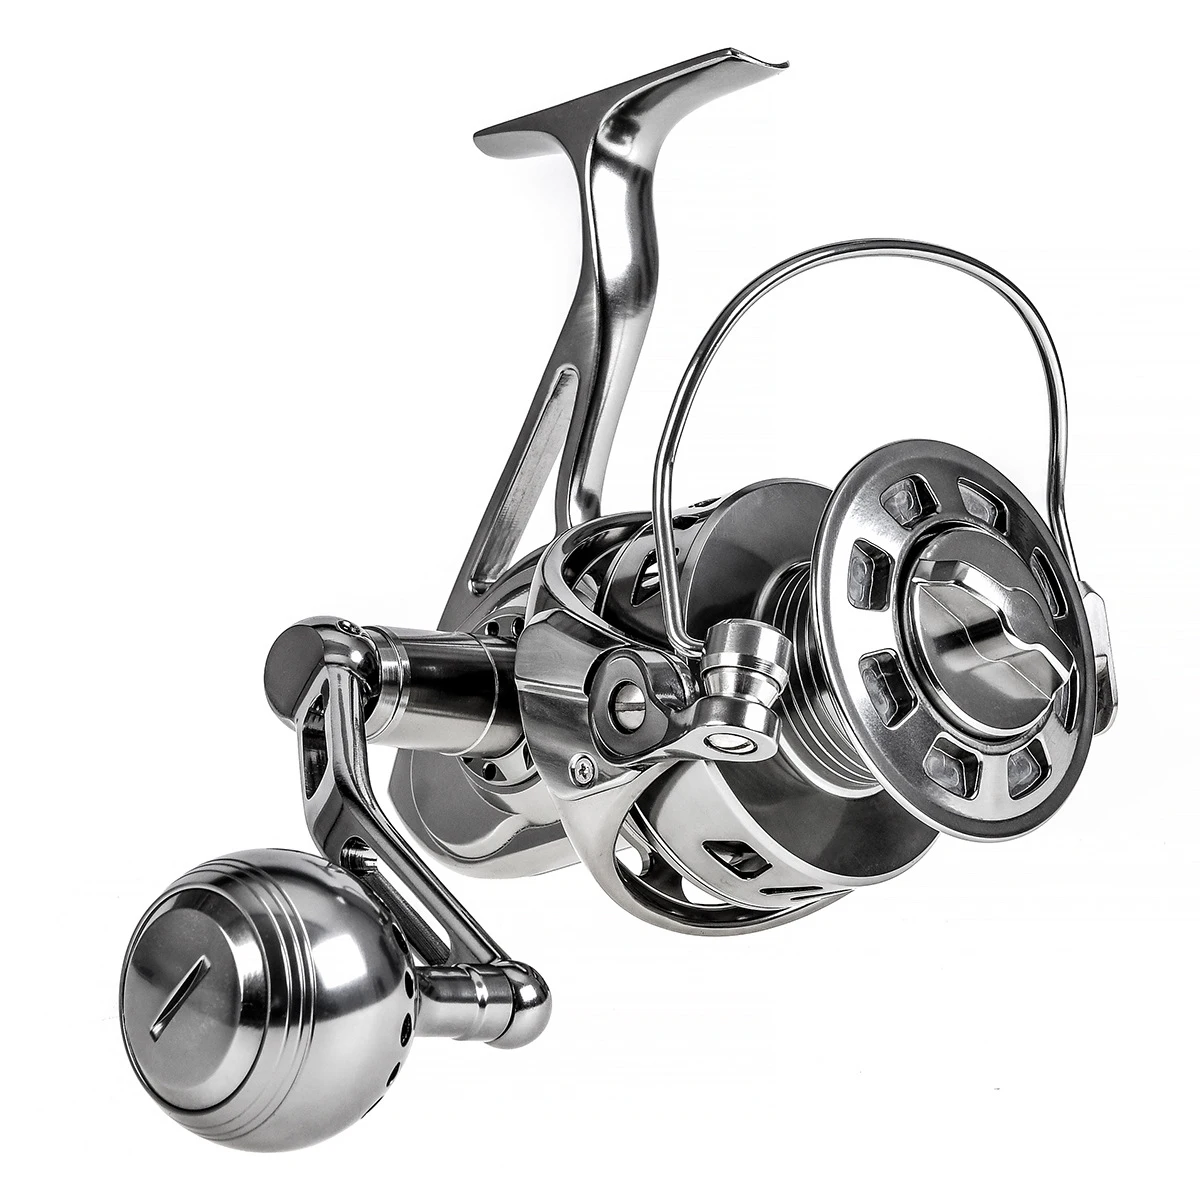 

new High Quality 11+1 BB Double Spool Fishing Reel 5.5:1 Gear Ratio High Speed Spinning Reel Carp Fishing Reels For Saltwater, See detailed drawing